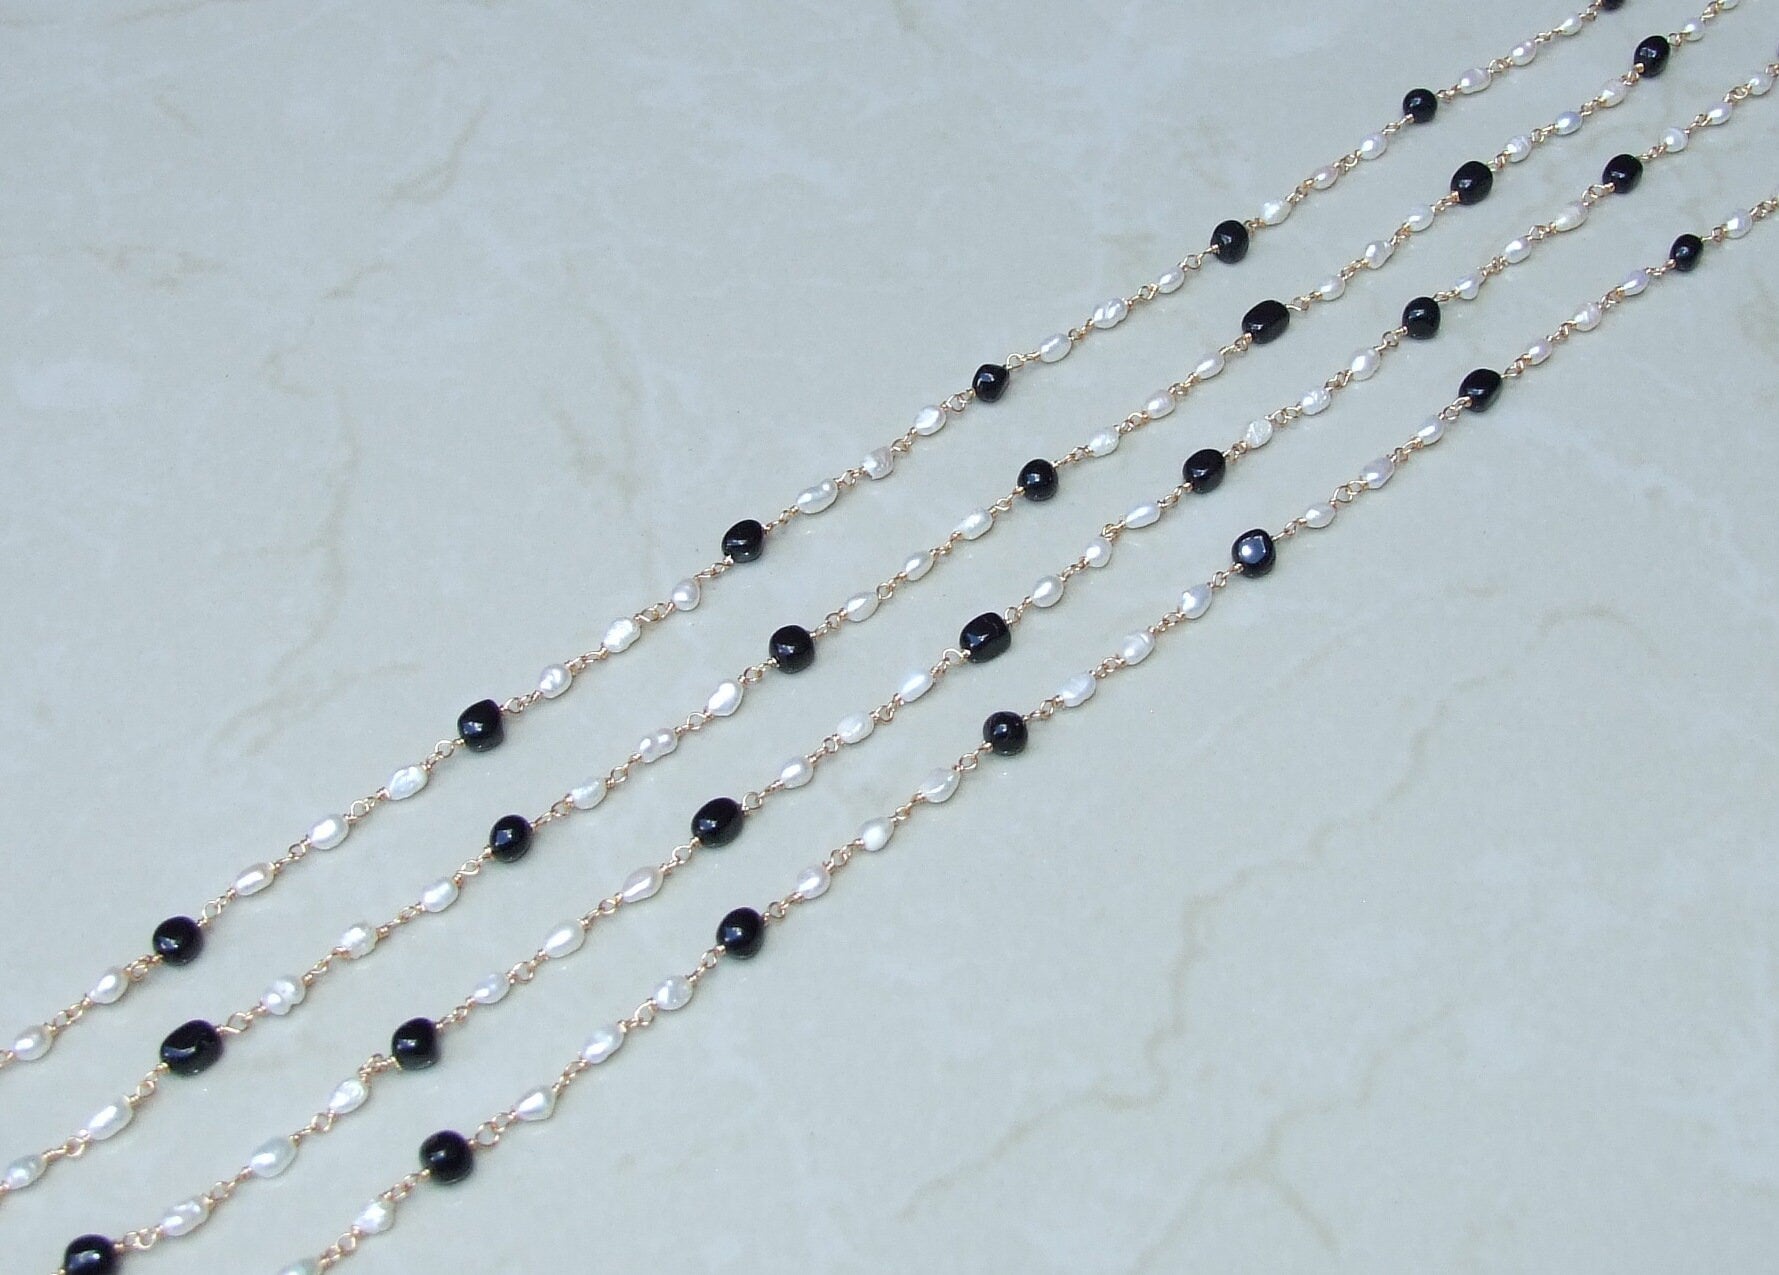 Jet Black Onyx and Freshwater Pearl Rosary Chain, Bulk Chain, Beaded Chain, Body Chain Jewelry, Gold Chain, Necklace Chain, Belly Chain